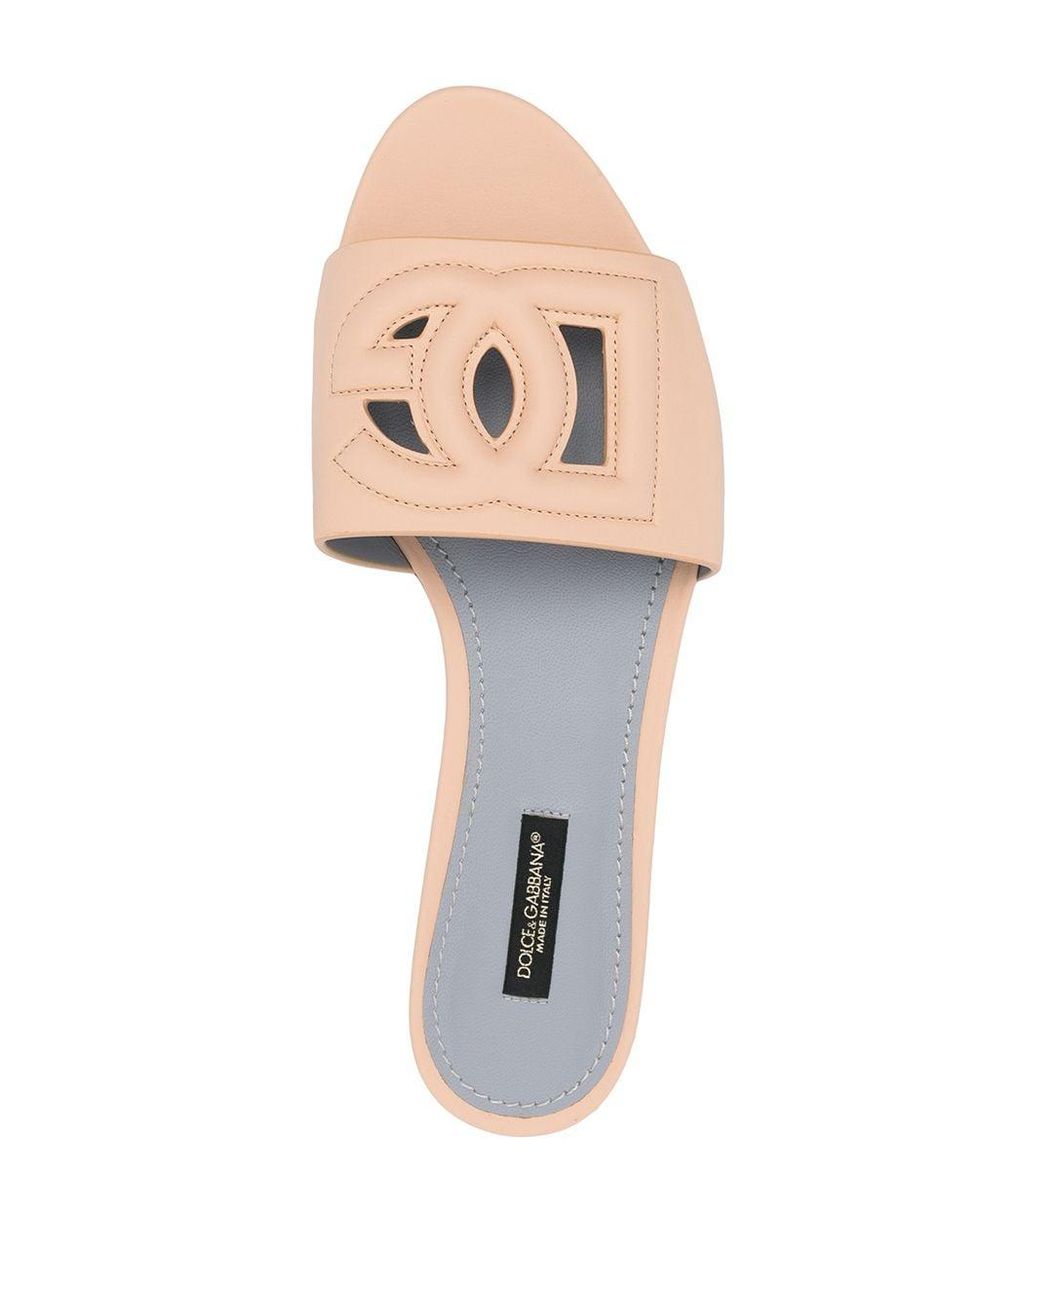 Dolce & Gabbana Cut-out Dg Flat Sandals in Pink | Lyst